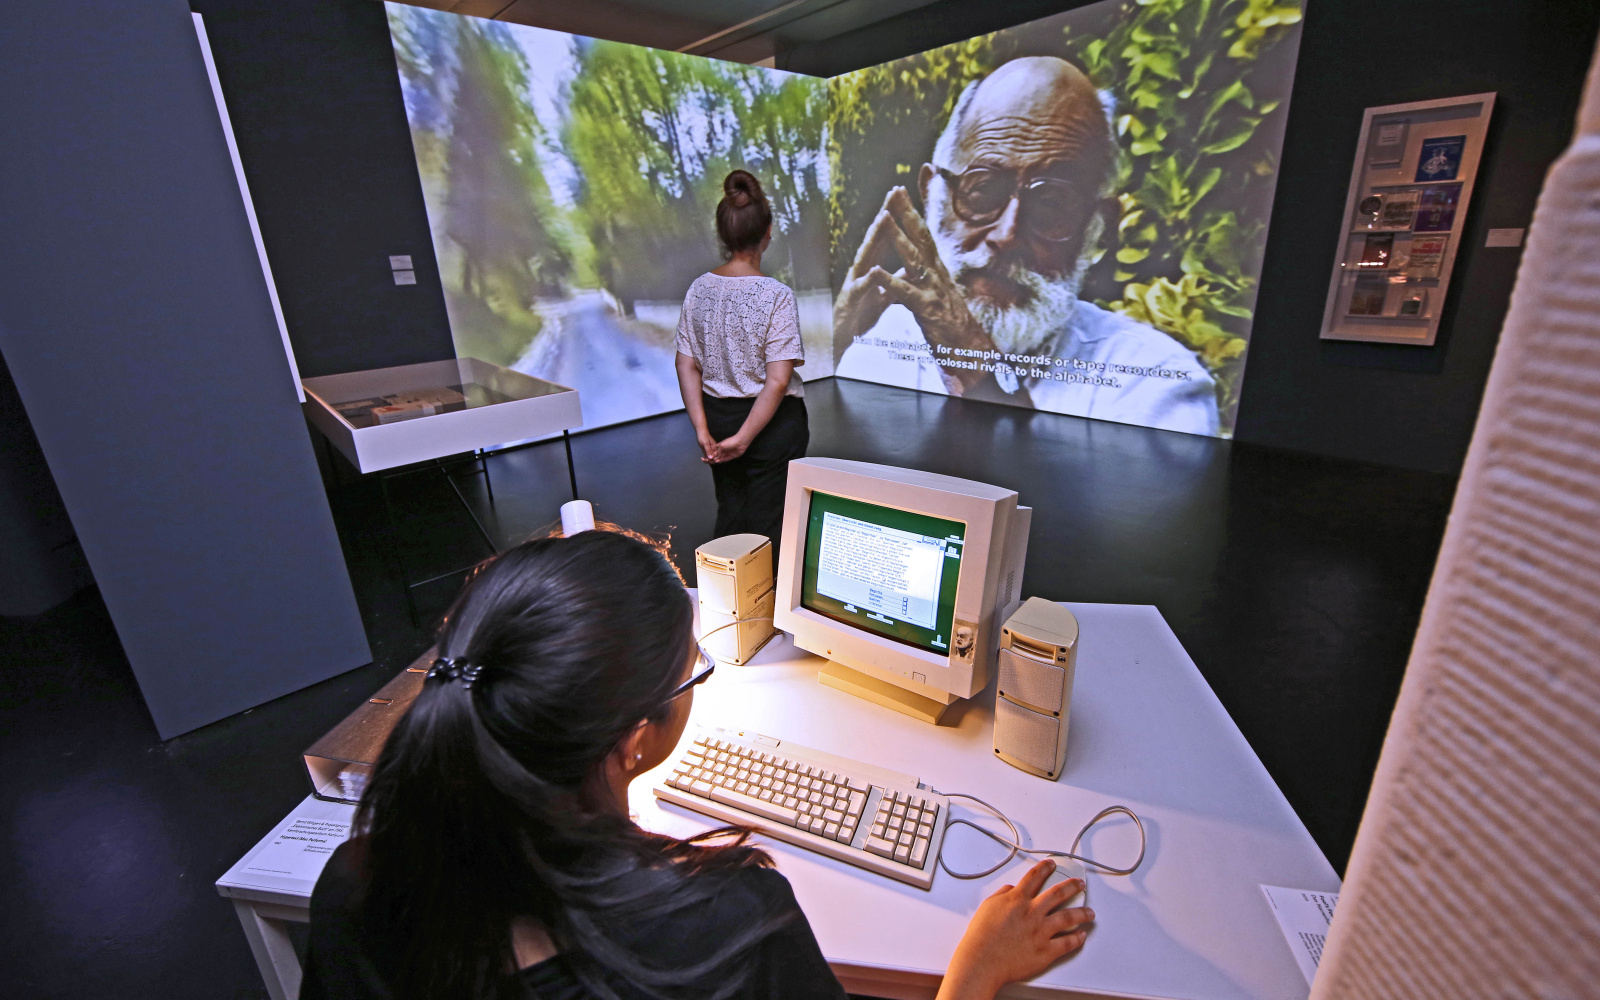 Exhibition view: foreground a girl sitting at a computer, in the background a video projection with Vilém Flusser that fills an entire wall